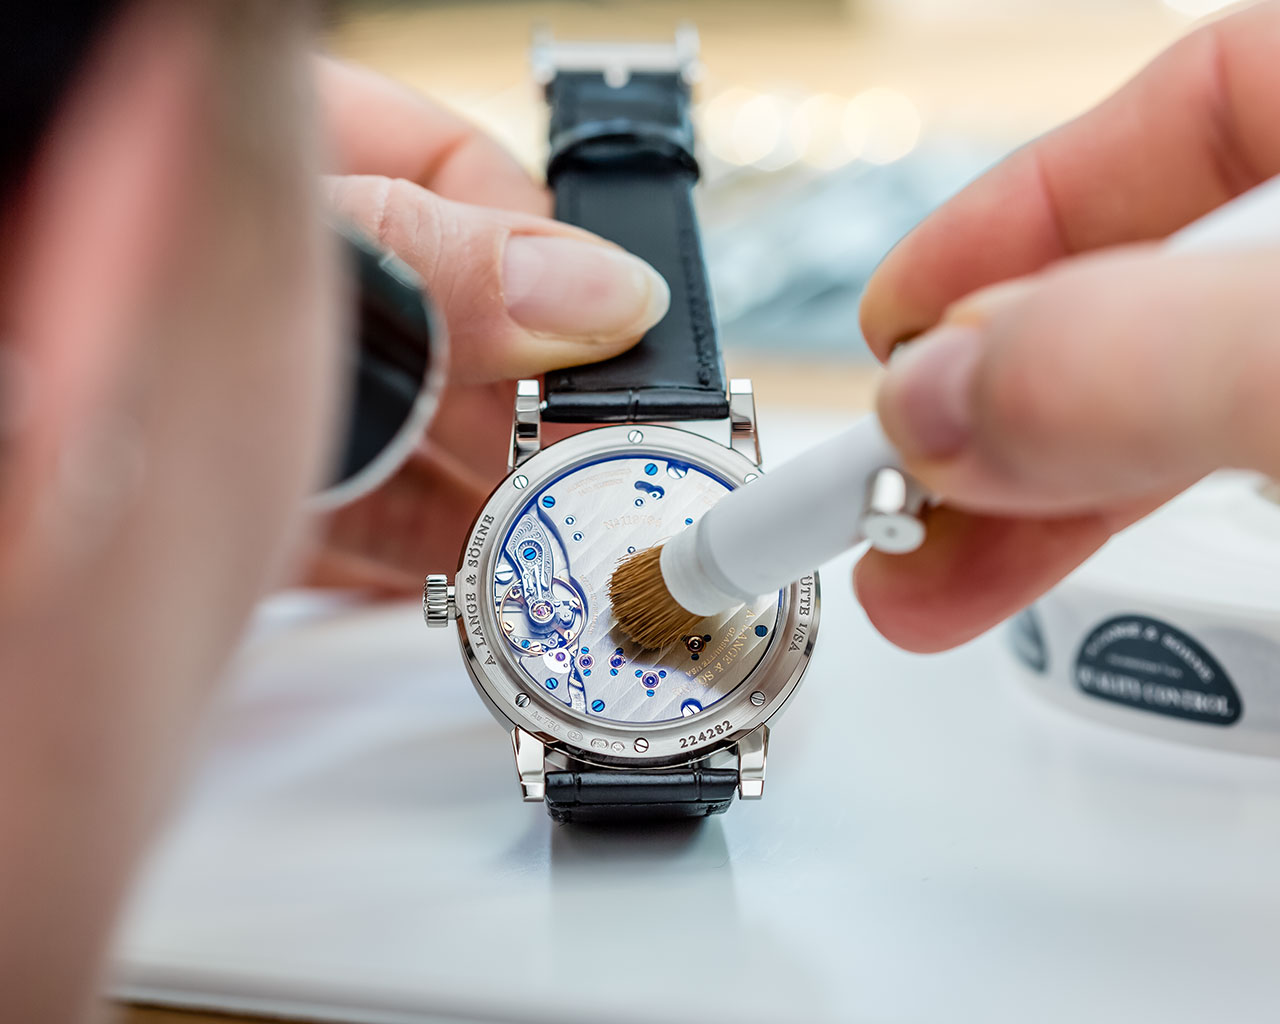 The timepiece undergoes rigorous tests of functional integrity and precision, which may last for several weeks. 